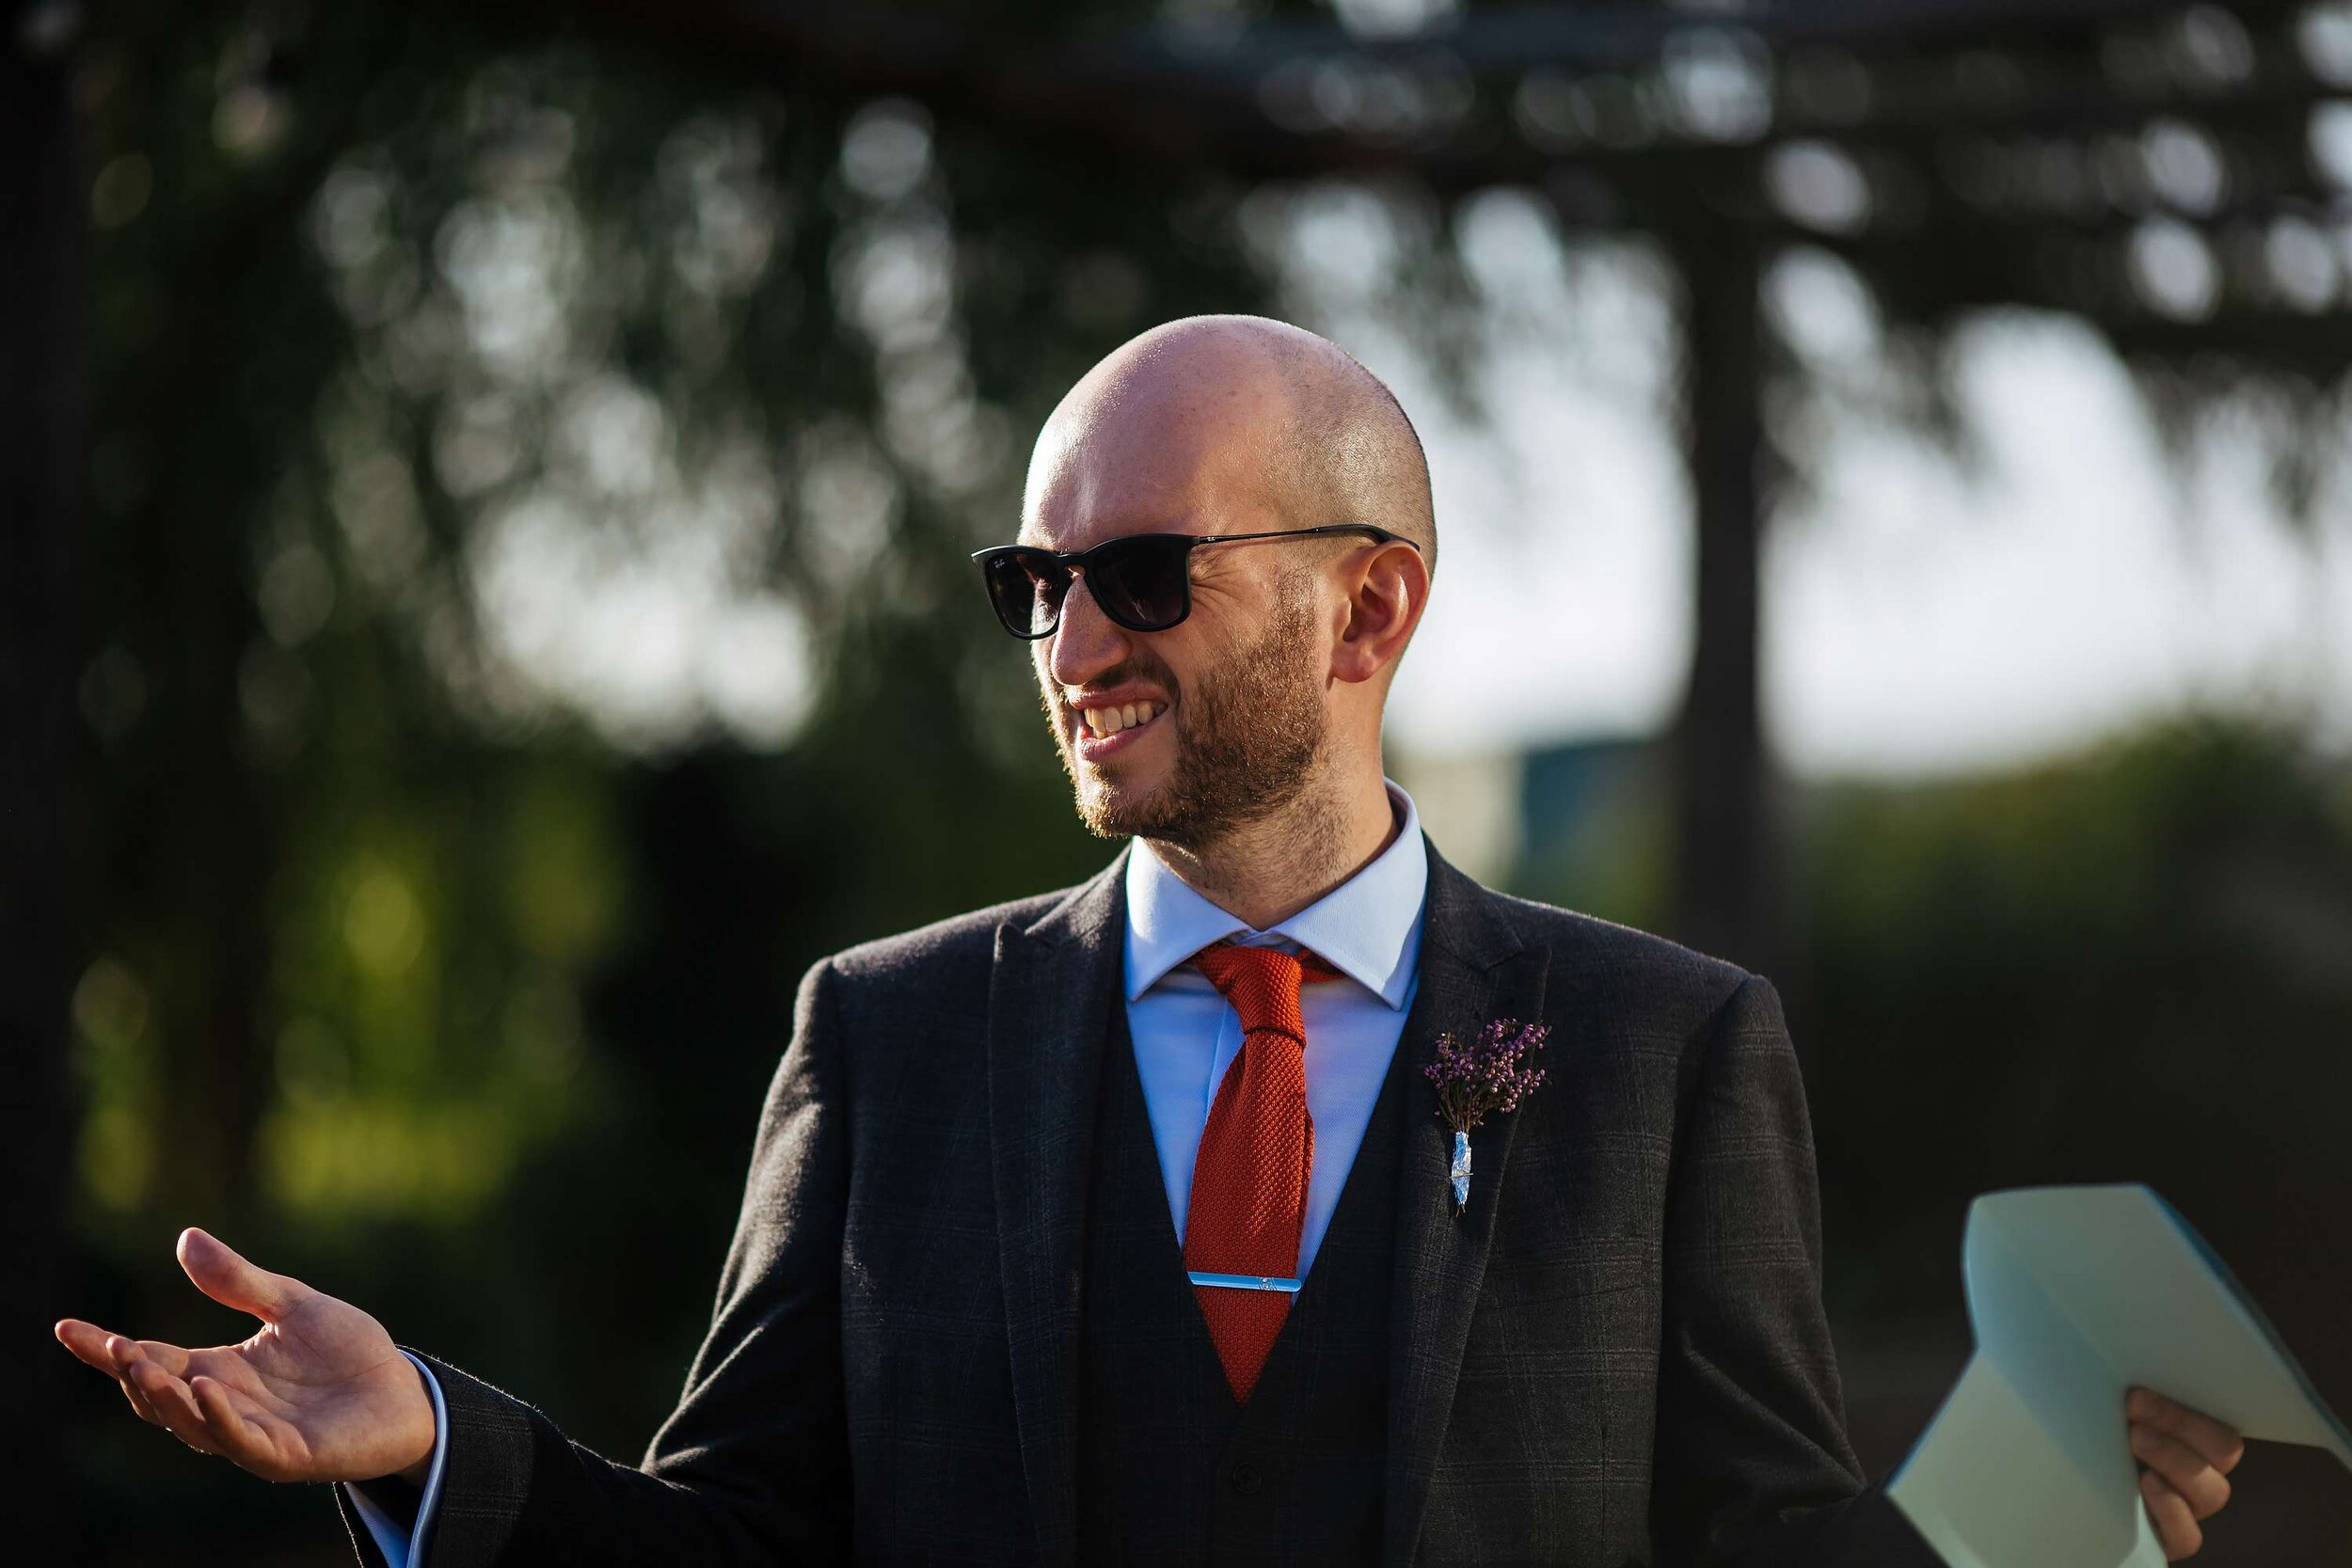 Groom performs his speech with sunglasses